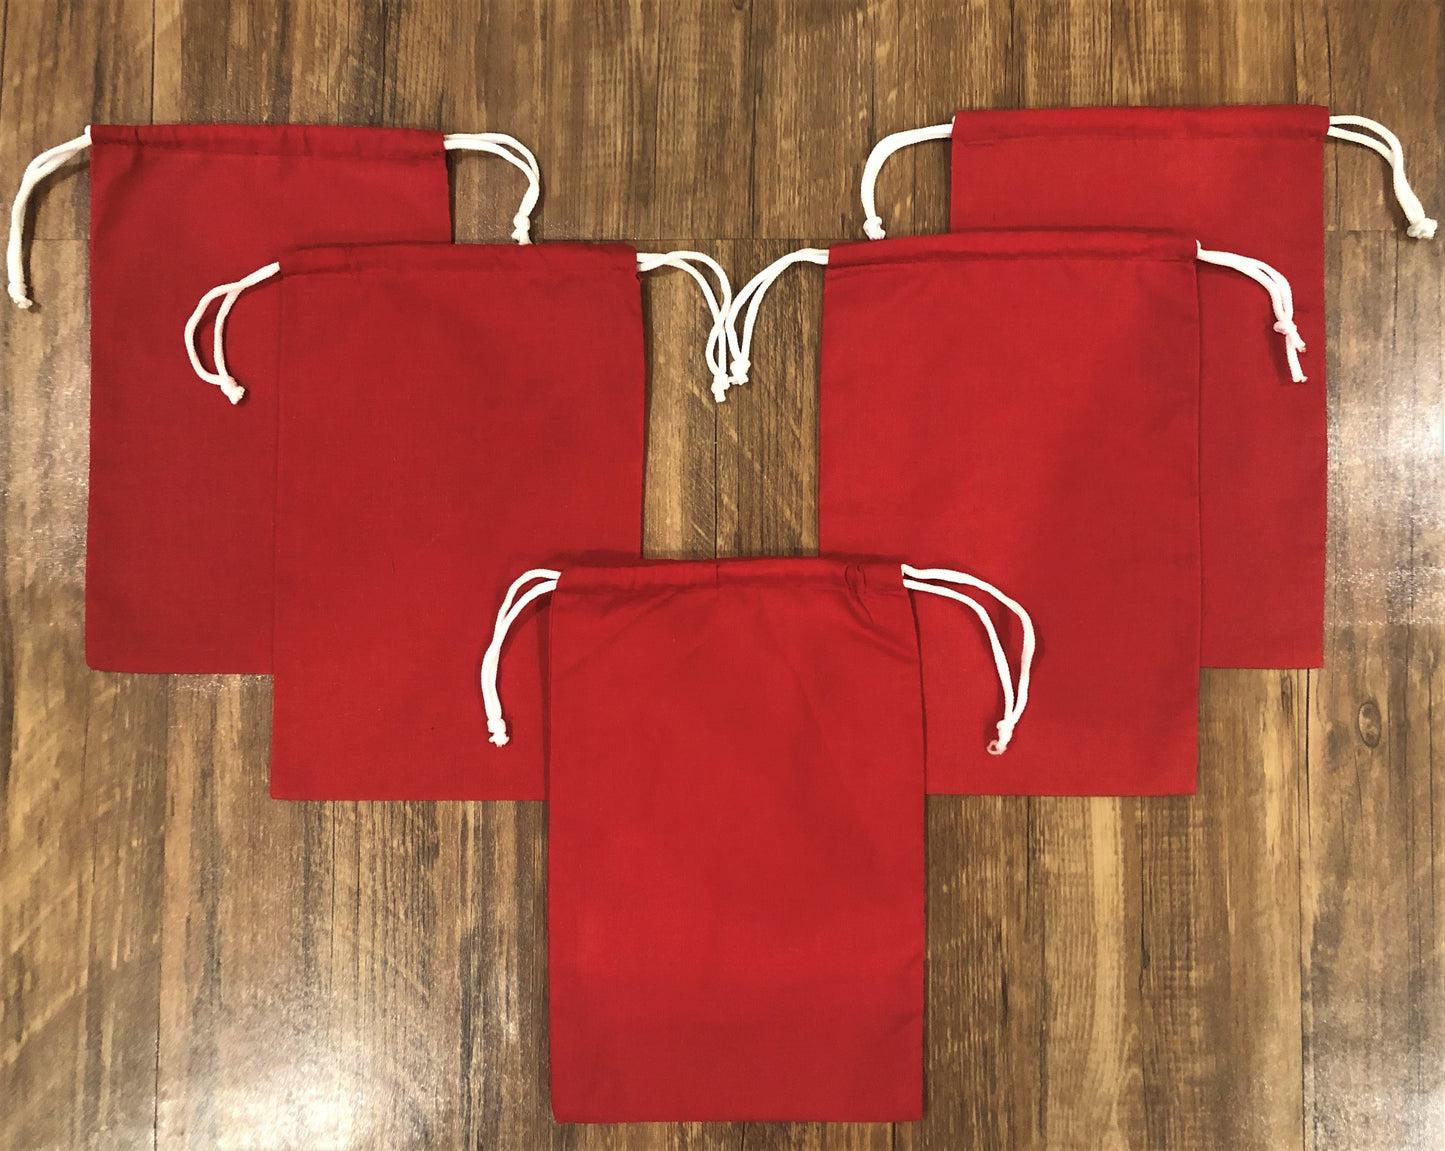 10x12 Inches Reusable Eco-Friendly Cotton Double Drawstring Bags Red Color